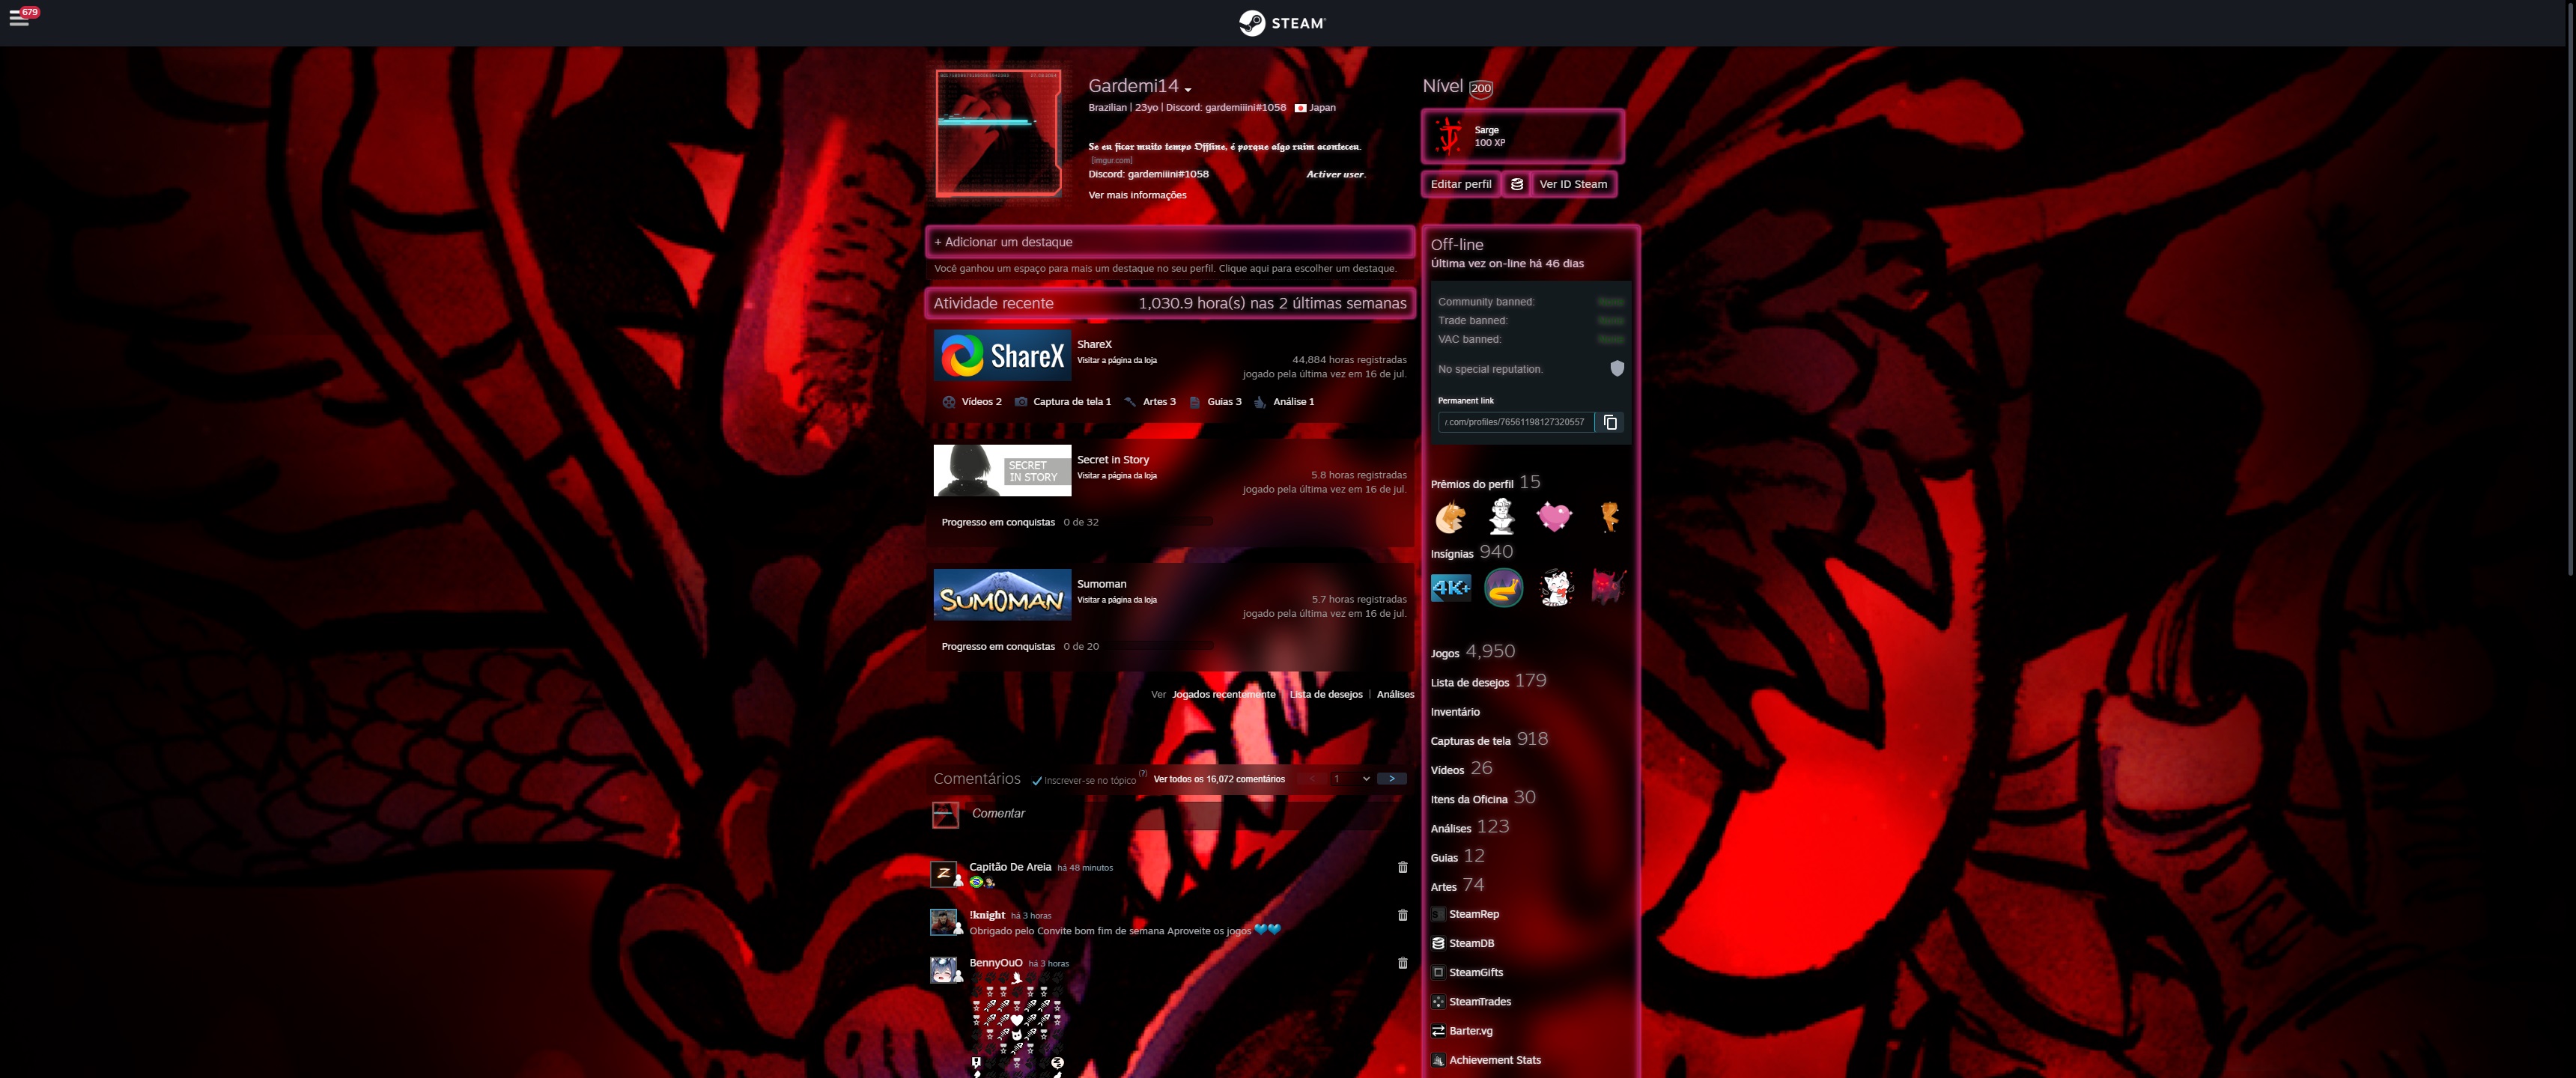 ShareX - How to Change Profile Theme - Steam Deck exclusive profile theme - 1BF8051